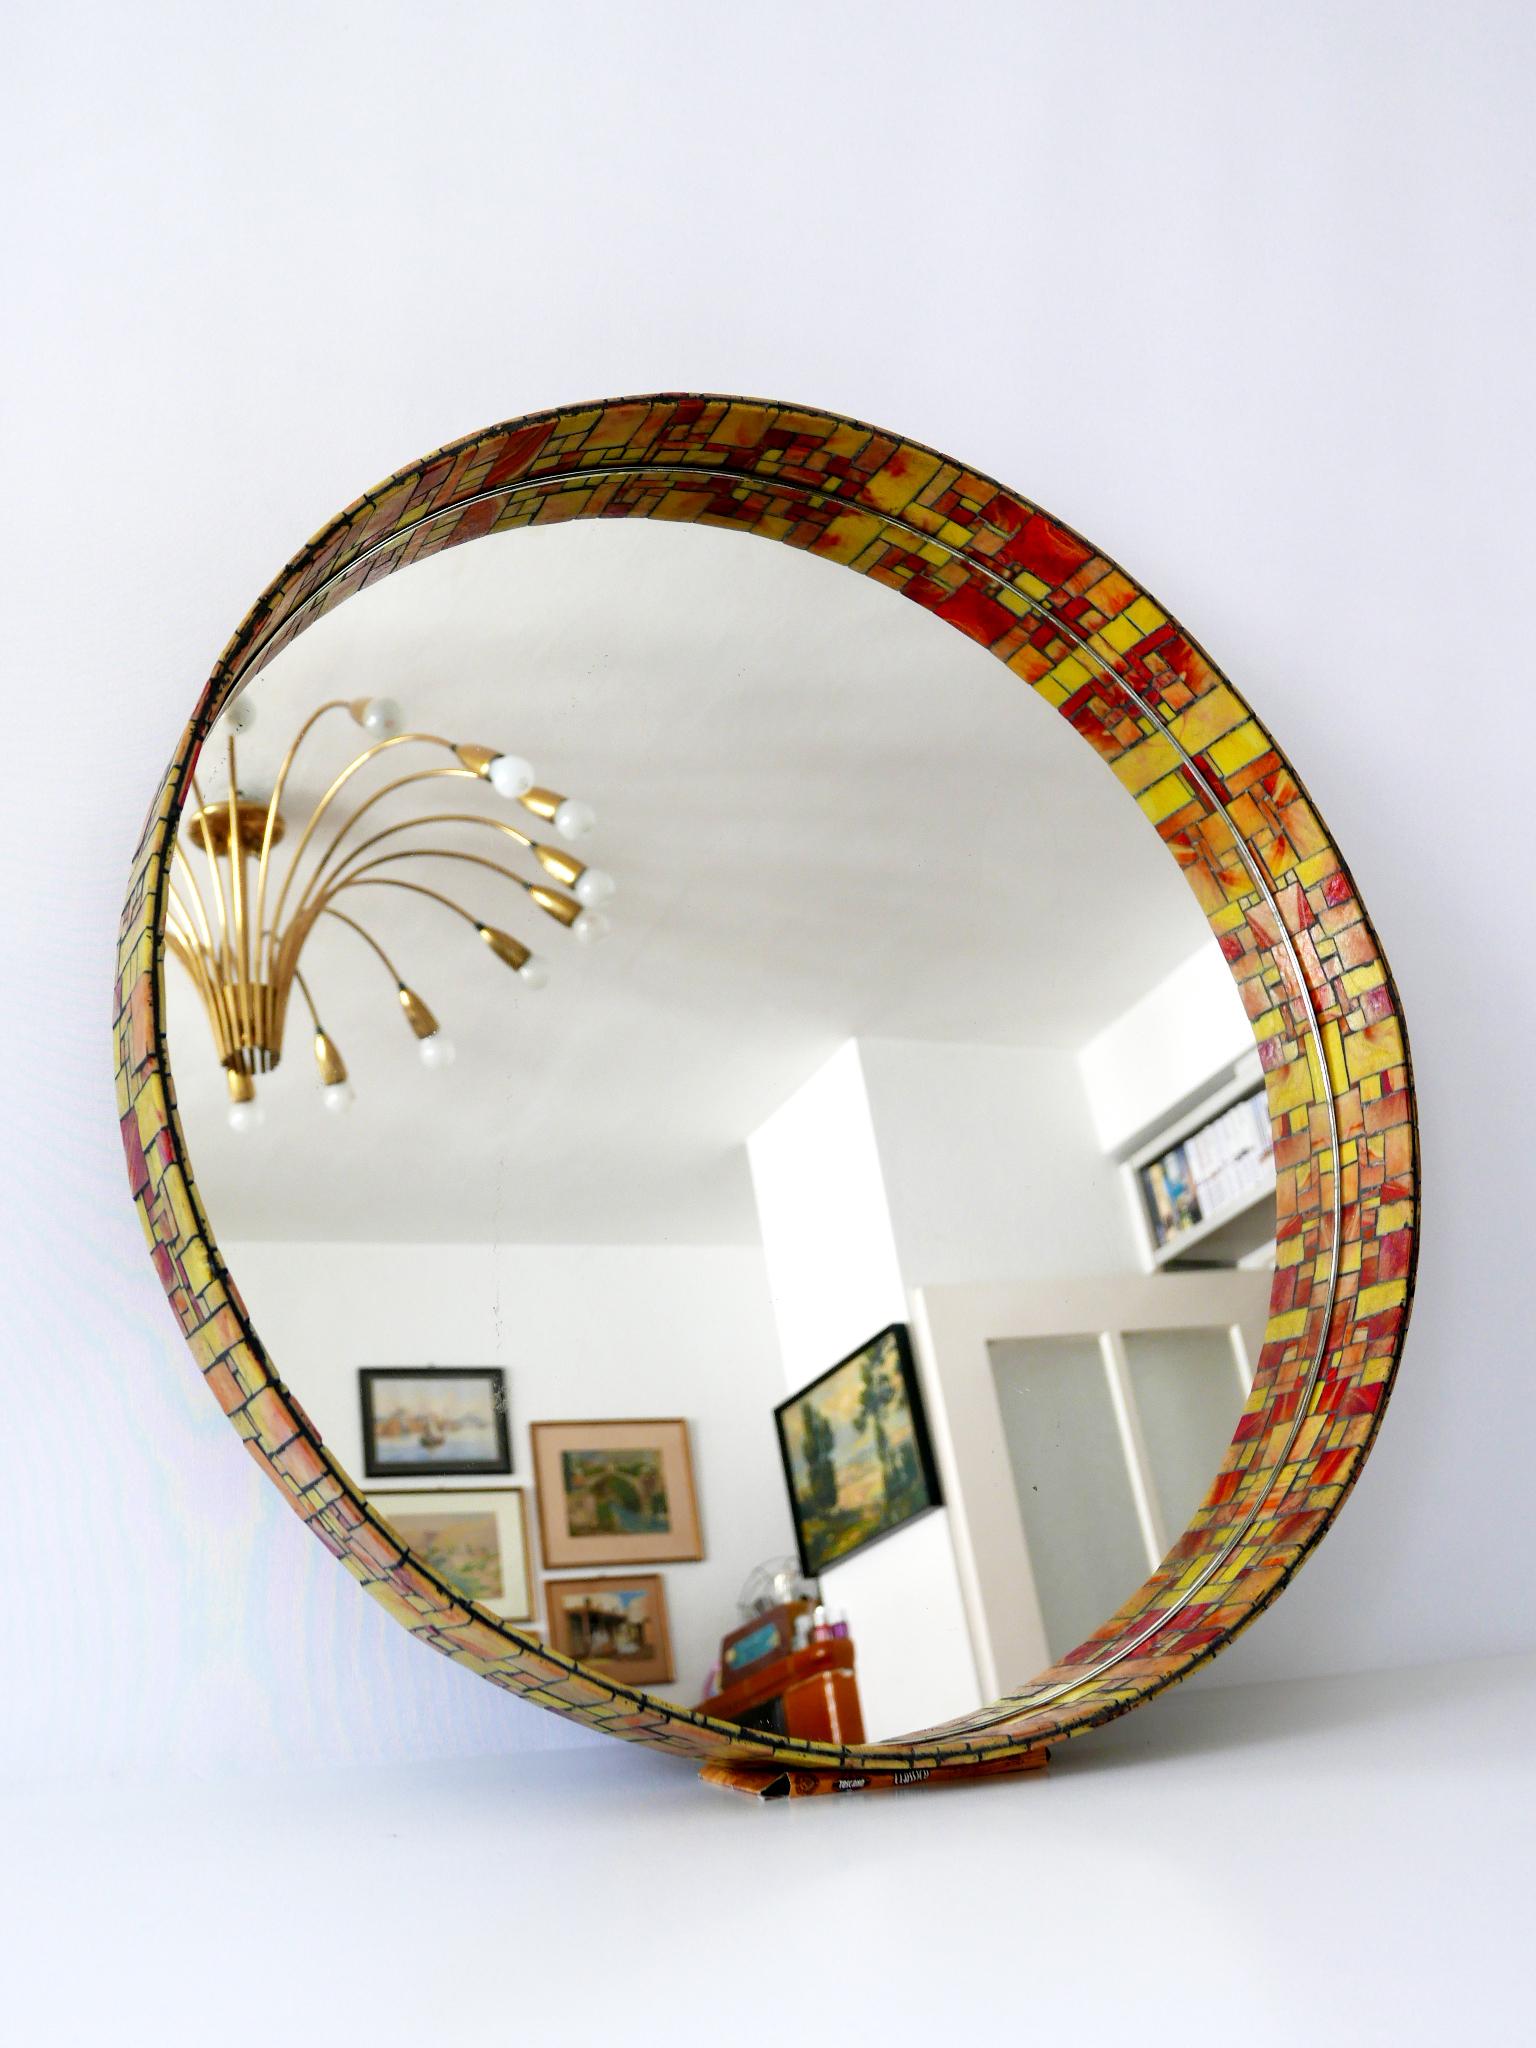 Exceptional Mid-Century Modern Mosaic Framed Circular Wall Mirror, Italy, 1960s For Sale 7